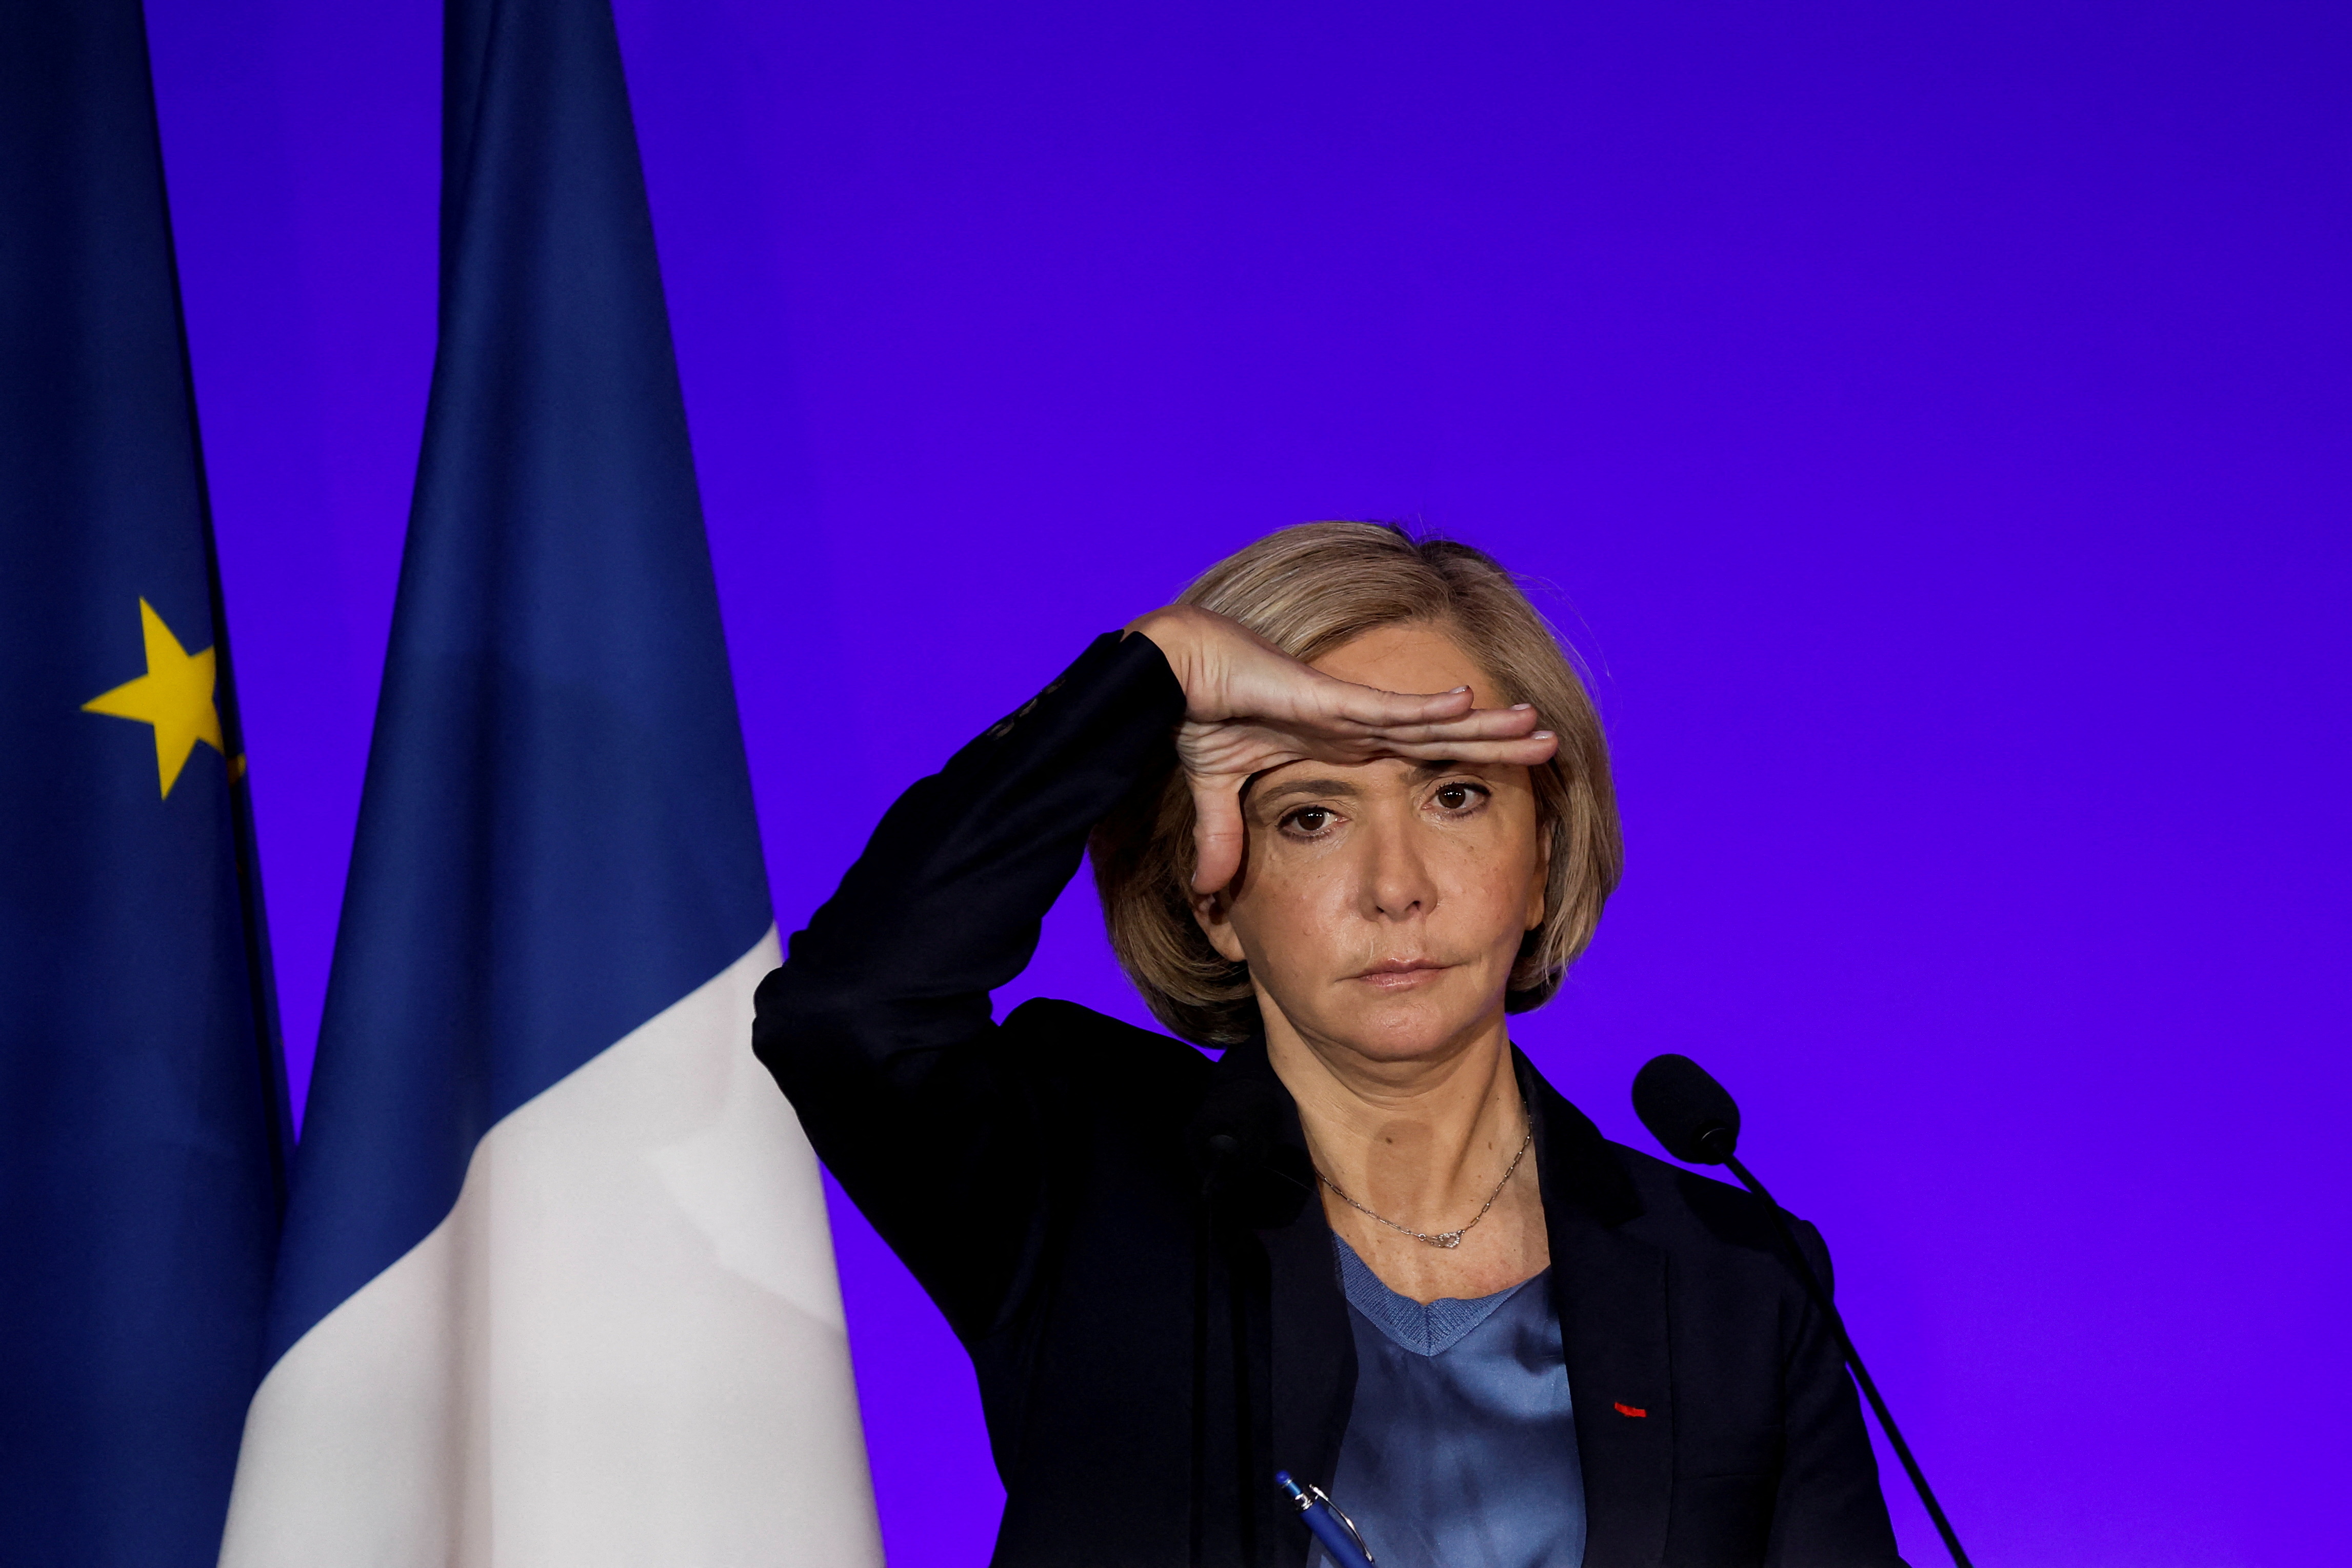 Valerie Pecresse, head of the Paris Ile-de-France region and Les Republicains (LR) right-wing party candidate for the 2022 French presidential election presents her electoral program in Paris